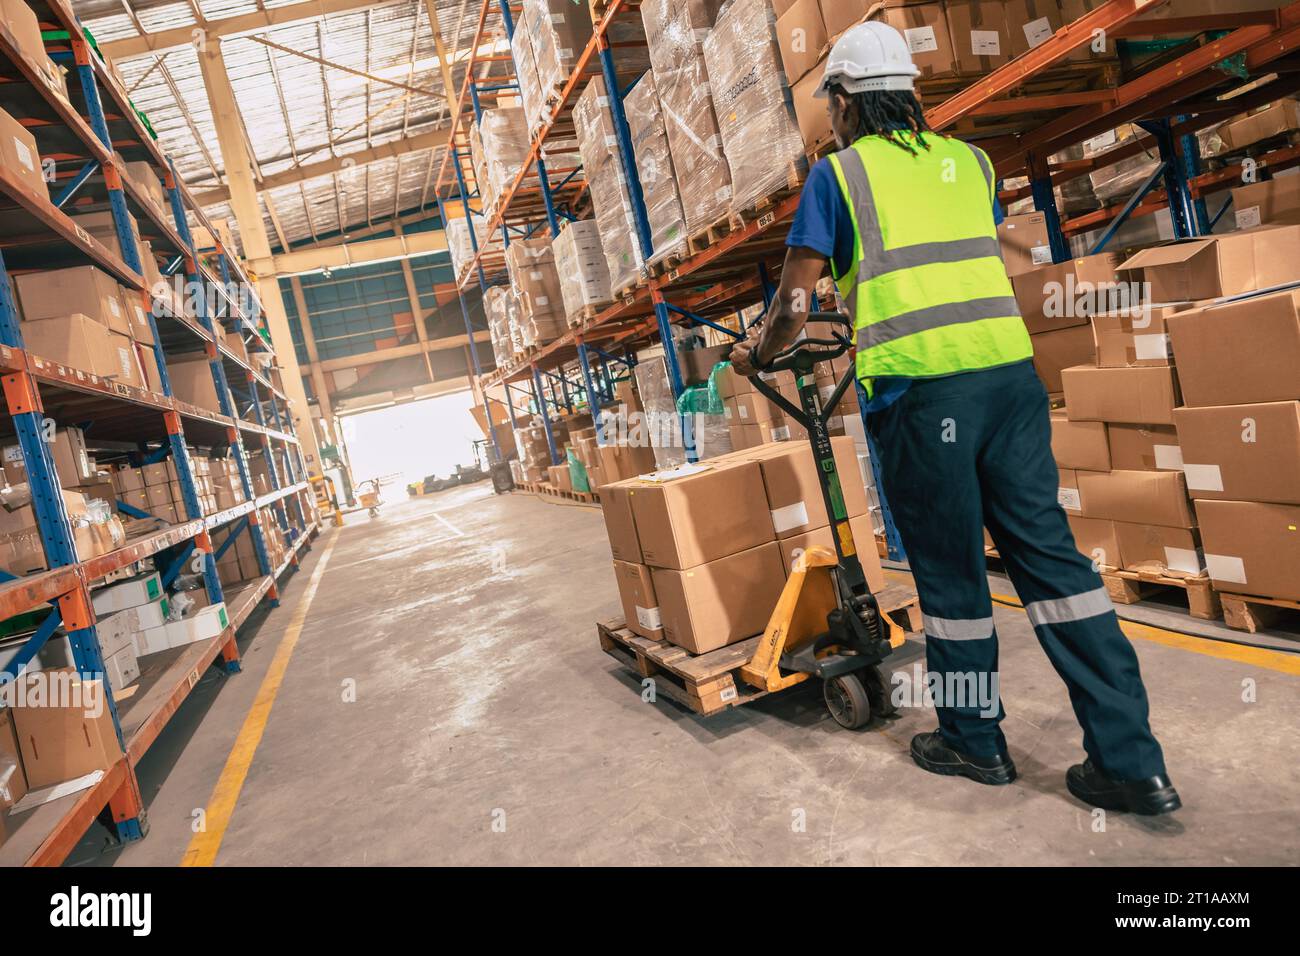 Warehouse staff worker load moving parcel for delivery shipping import export goods in shelf storage working area. Stock Photo